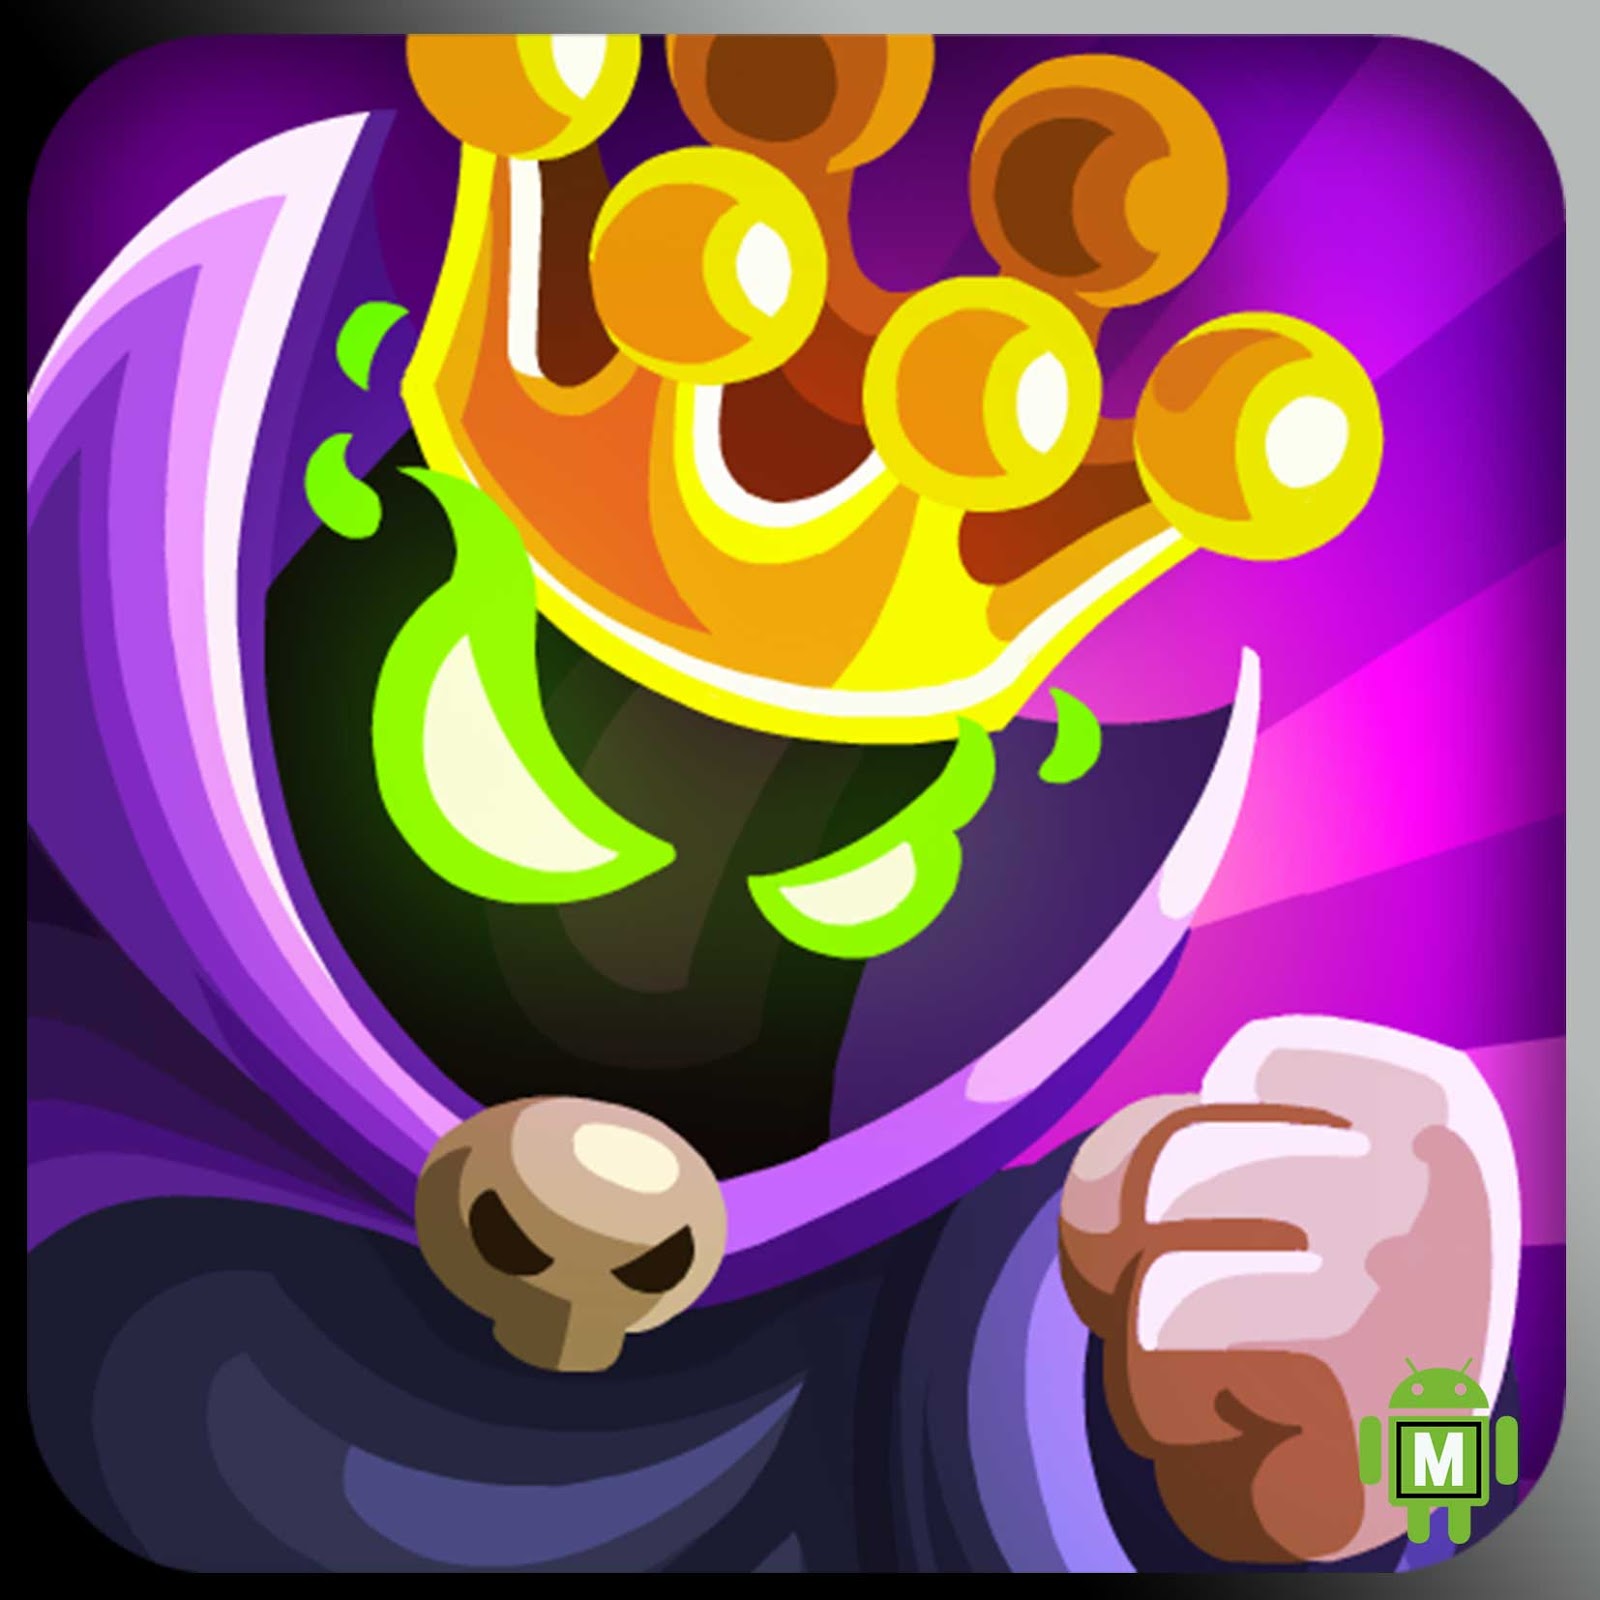 Game Apk Mod Unlimited - strong granny robux mod apk unlimited gems